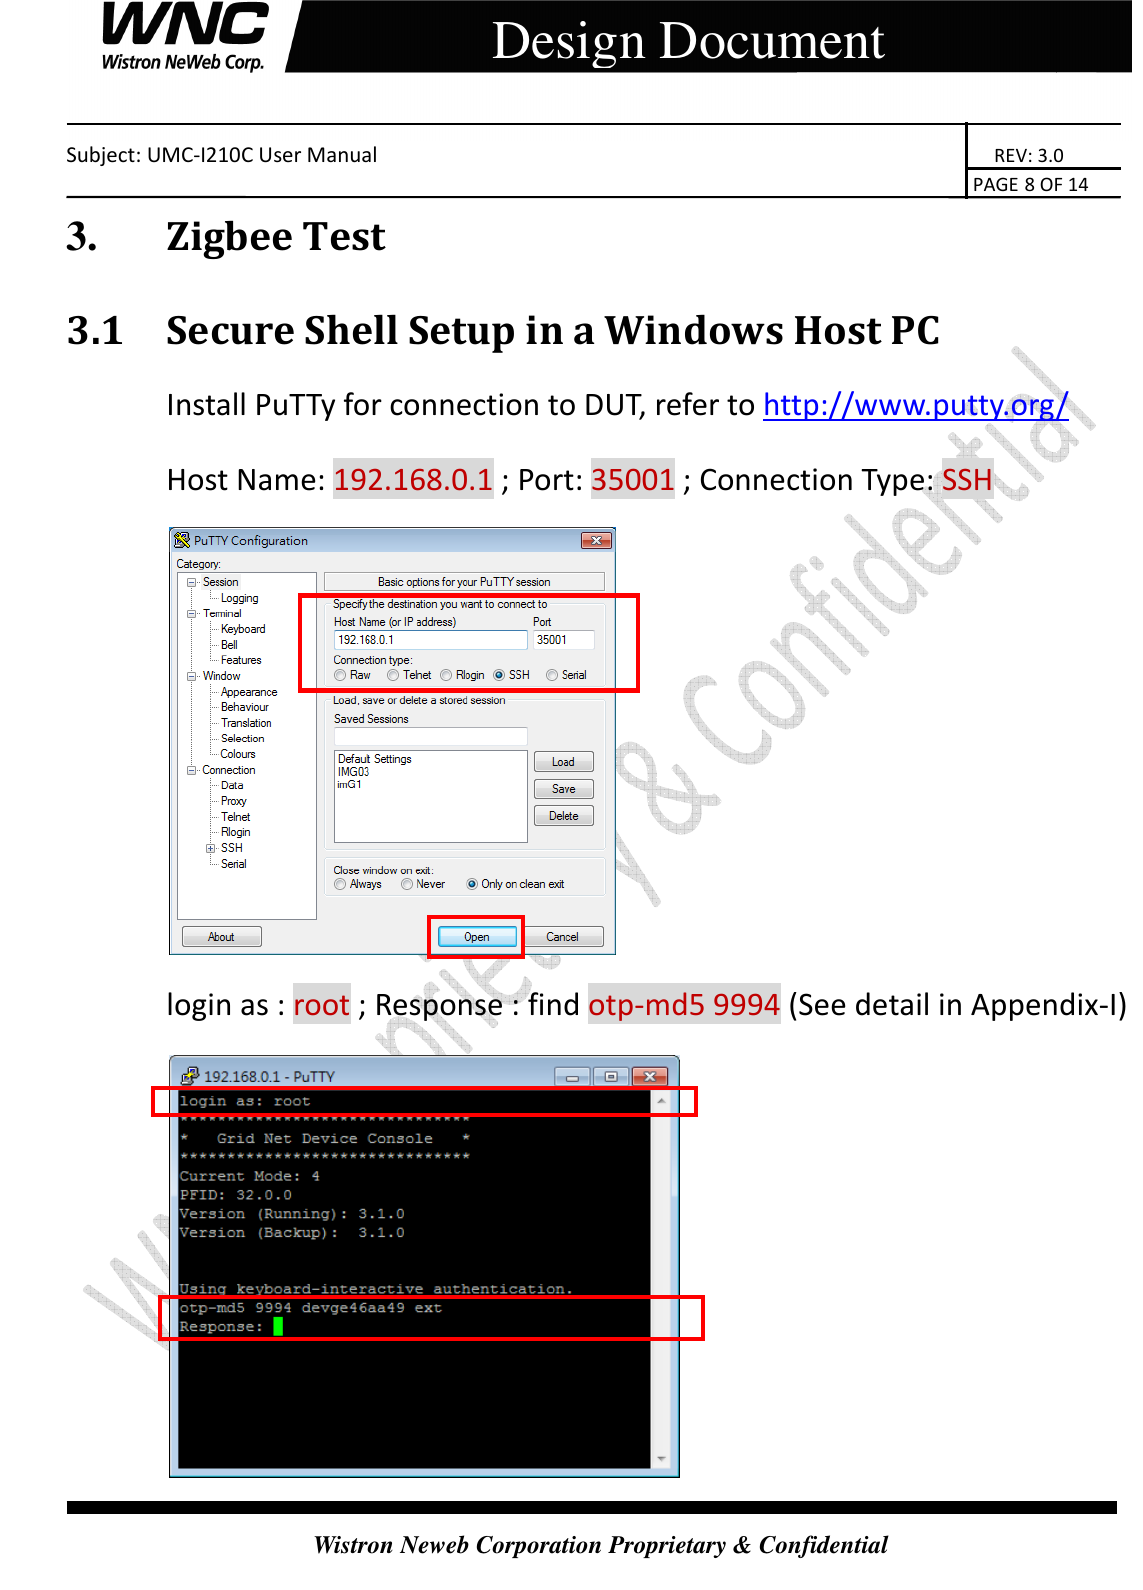    Subject: UMC-I210C User Manual                                                                       REV: 3.0                                                                                                                                                                               PAGE 8 OF 14  Wistron Neweb Corporation Proprietary &amp; Confidential     Design Document 3.       Zigbee Test 3.1 Secure Shell Setup in a Windows Host PC Install PuTTy for connection to DUT, refer to http://www.putty.org/ Host Name: 192.168.0.1 ; Port: 35001 ; Connection Type: SSH  login as : root ; Response : find otp-md5 9994 (See detail in Appendix-I)  